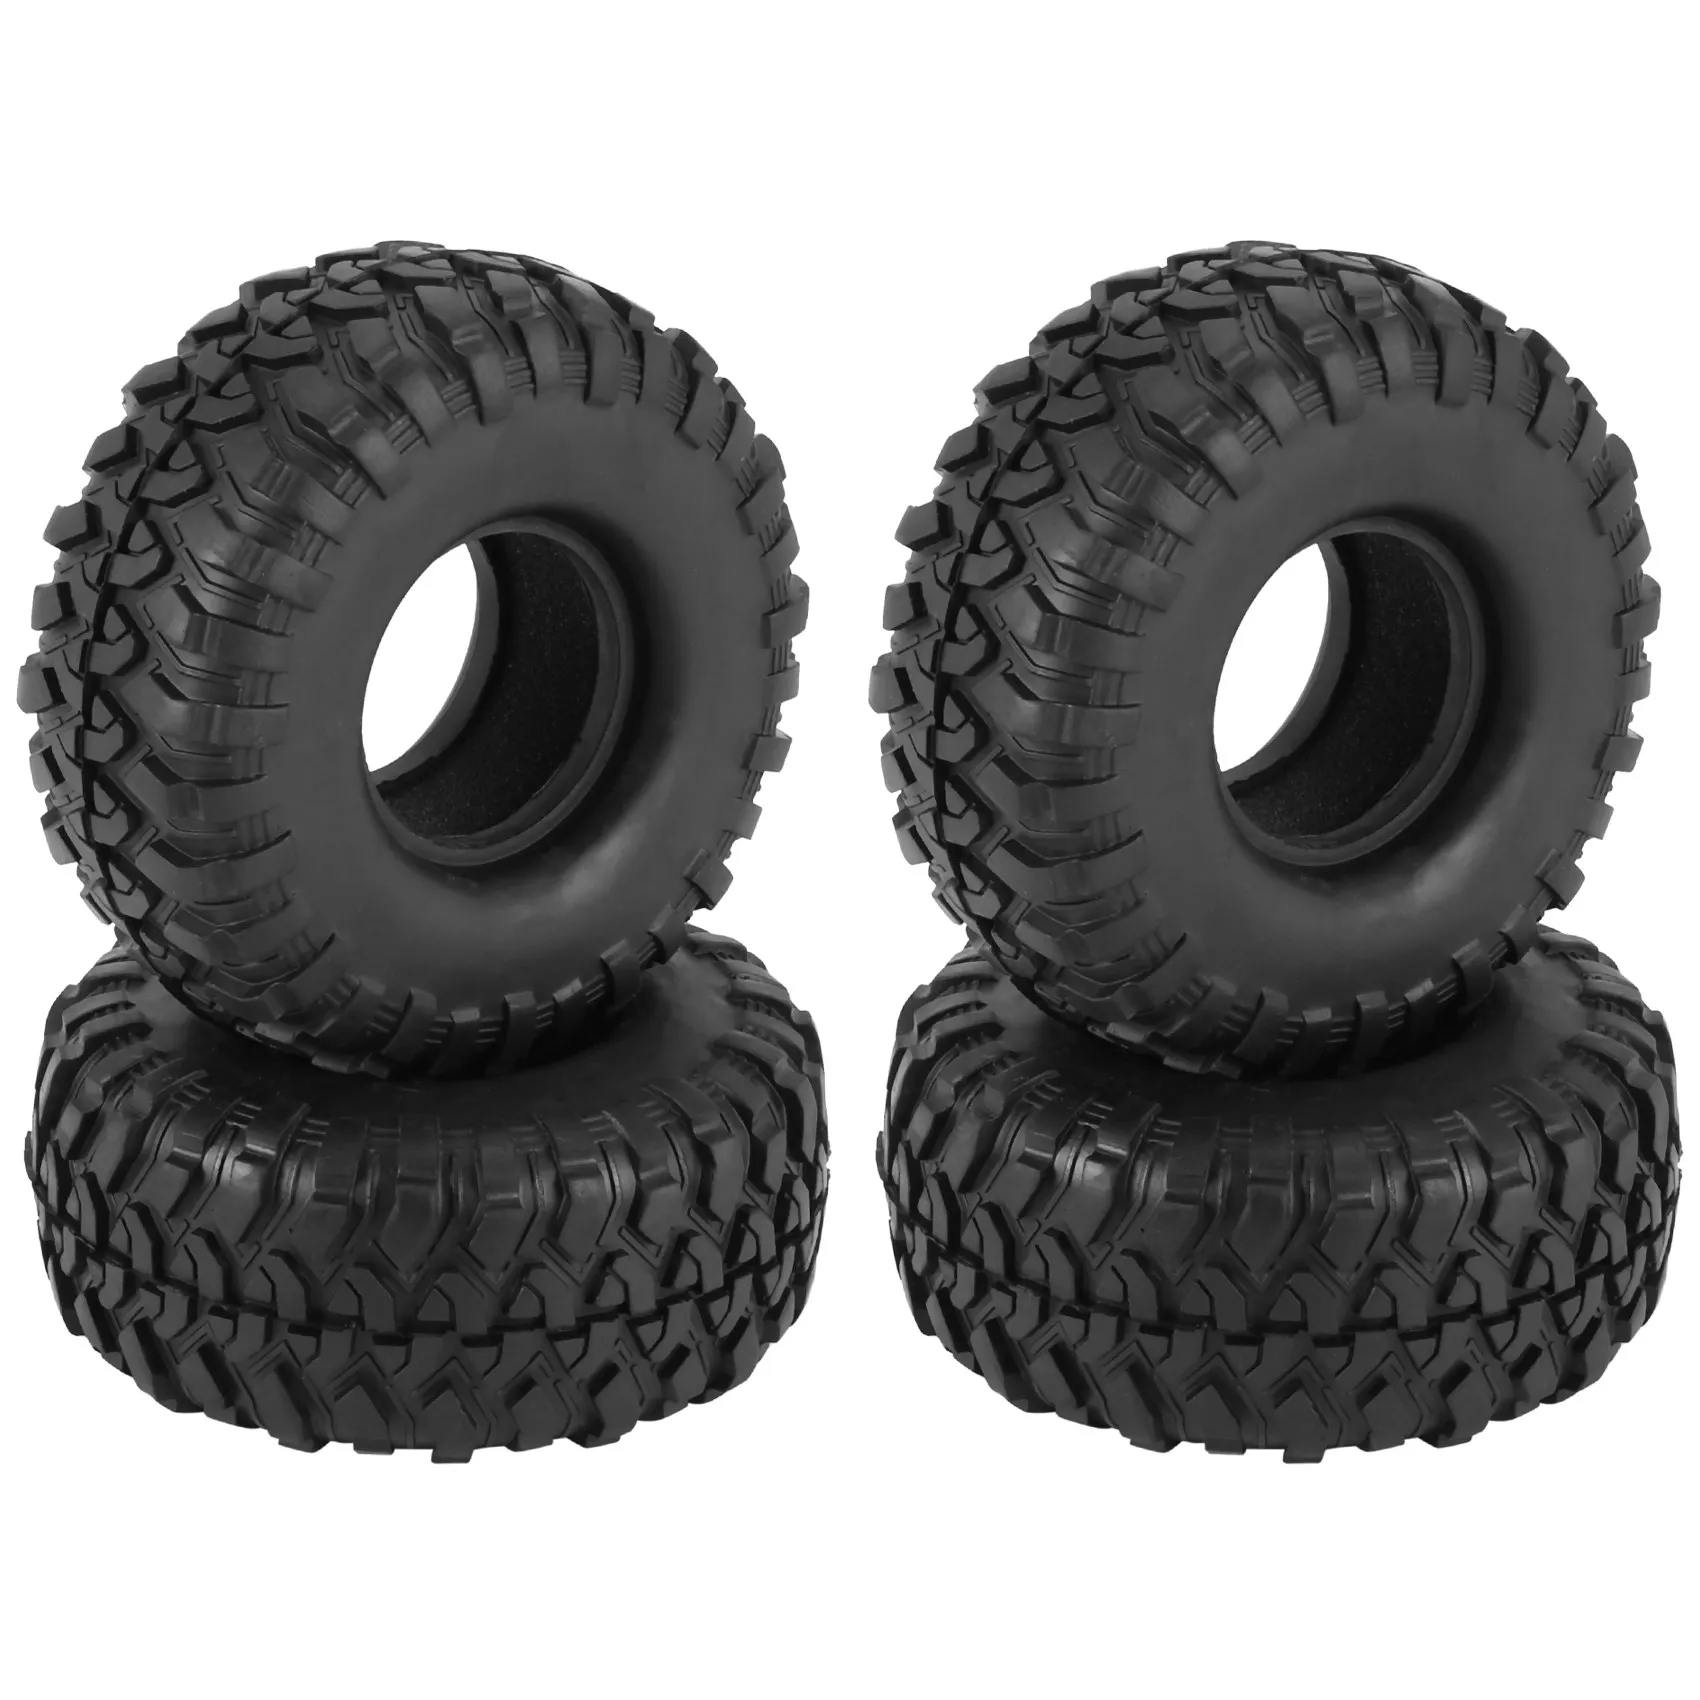 

4PCS 1.9 Inch Rubber Tyre 1.9 Wheel Tires 118X48MM for 1/10 RC Crawler Traxxas TRX4 Axial SCX10 90046 AXI03007